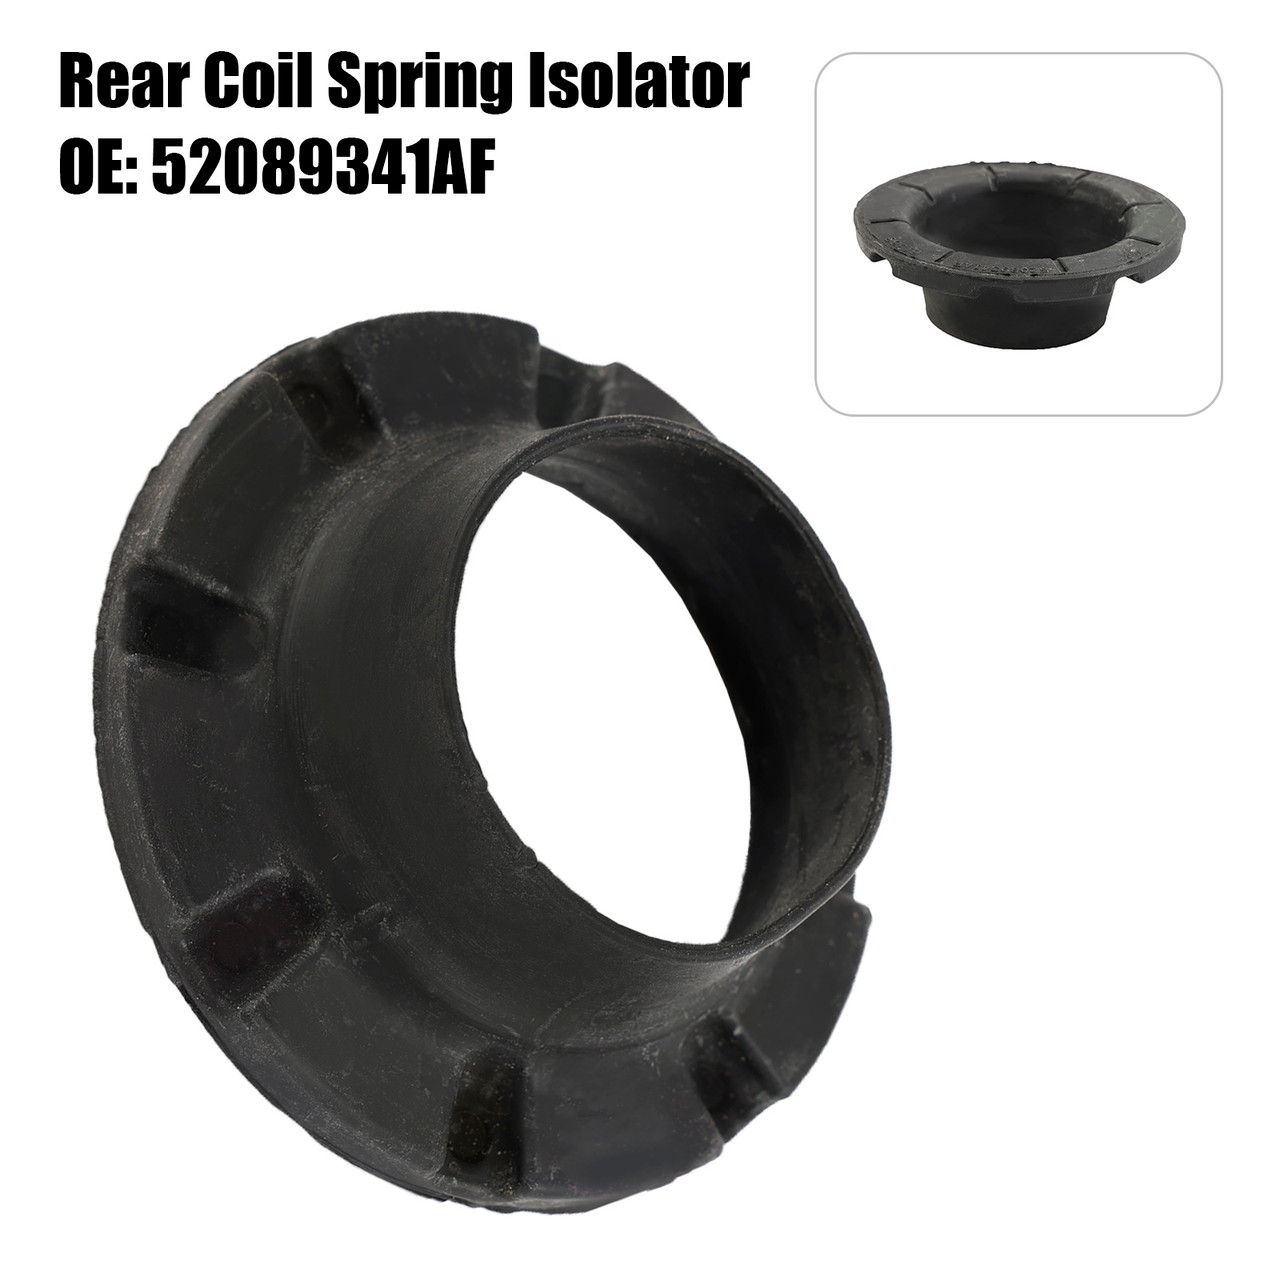 Rear Coil Spring Isolator 52089341AF for Jeep Grand Cherokee WK 2005-2010